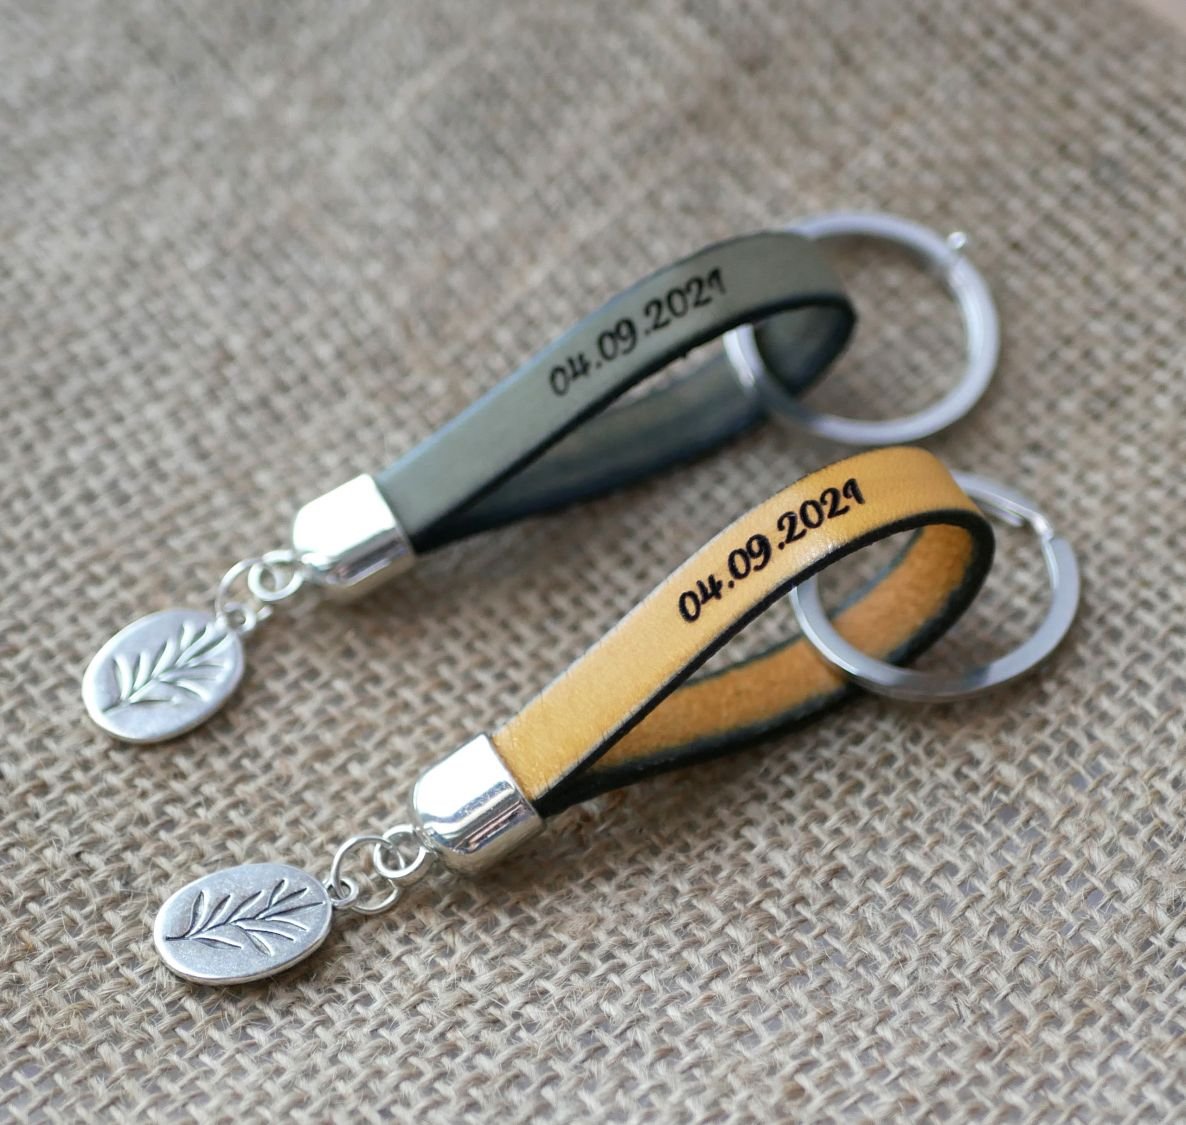 Leather key ring to be personalized by engraving with your choice of pendant